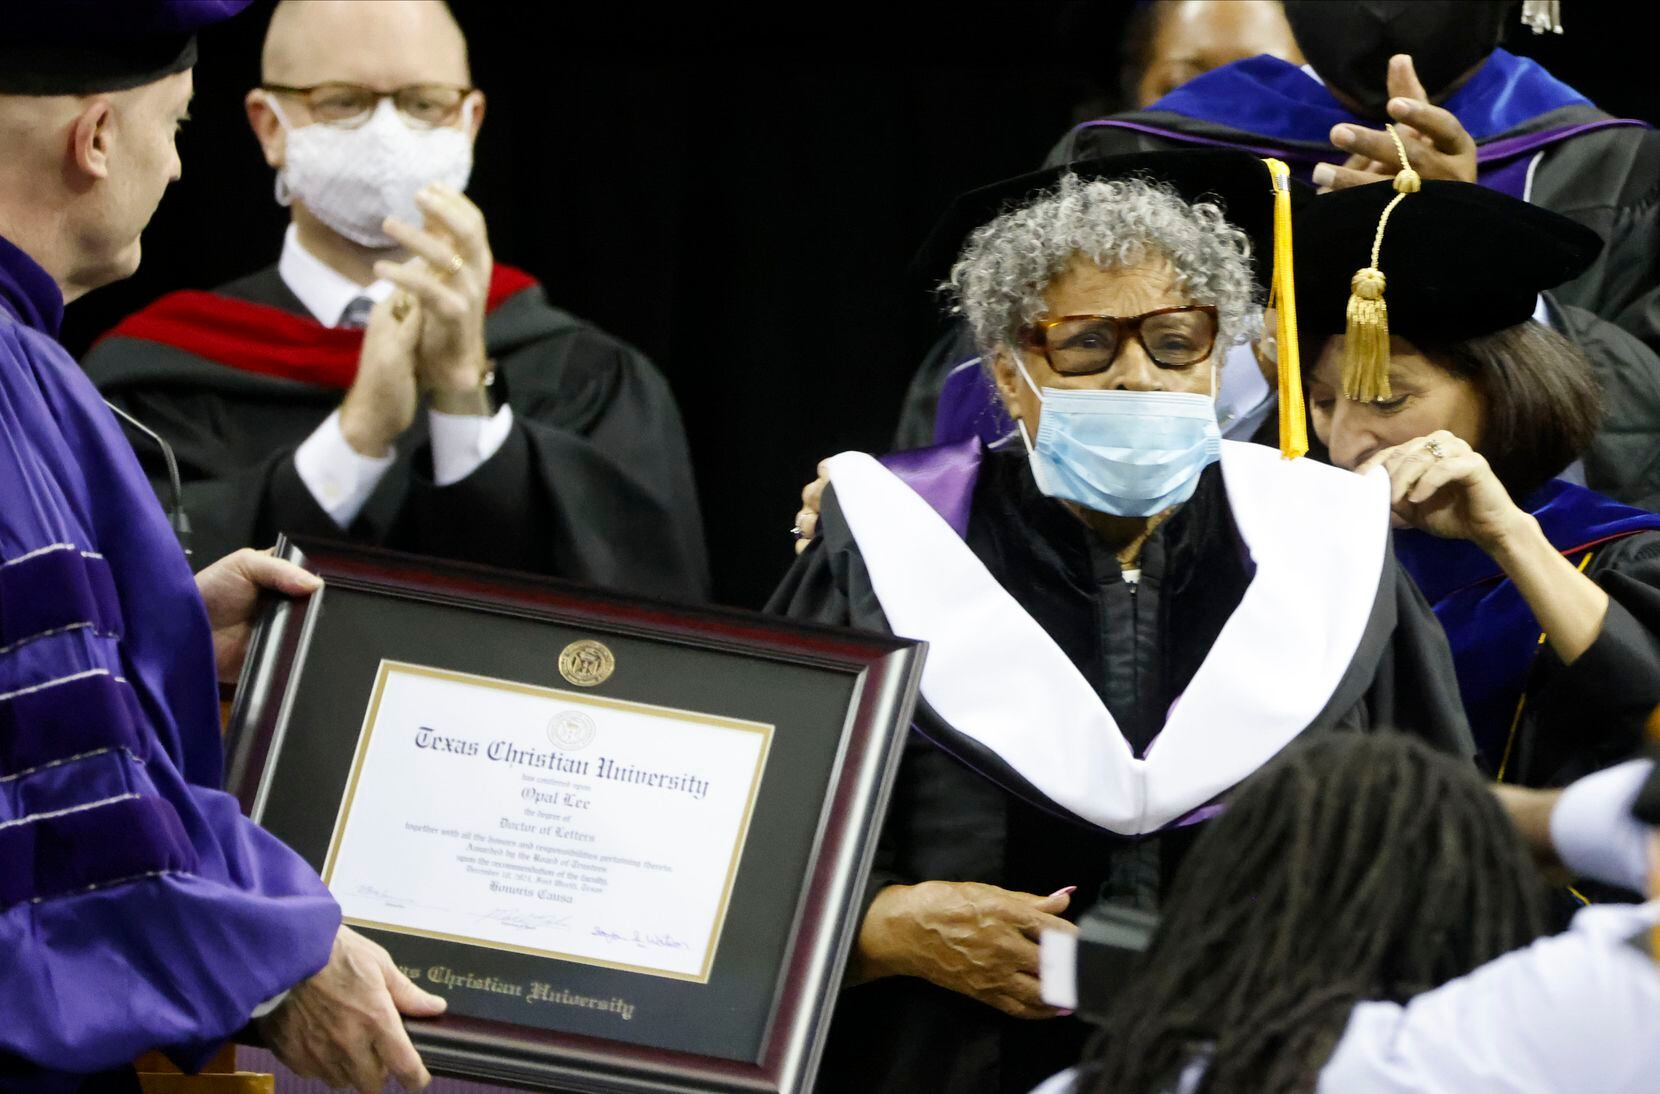 TCU Chancellor Victor J. Boschini Jr., left, and Provost Teresa Abi-Nader Dahlberg, right, presents Opal Lee, center, with an honorary Doctor of Letters at Commencement ceremonies in Fort Worth, Texas on Saturday, Dec. 18, 2021.